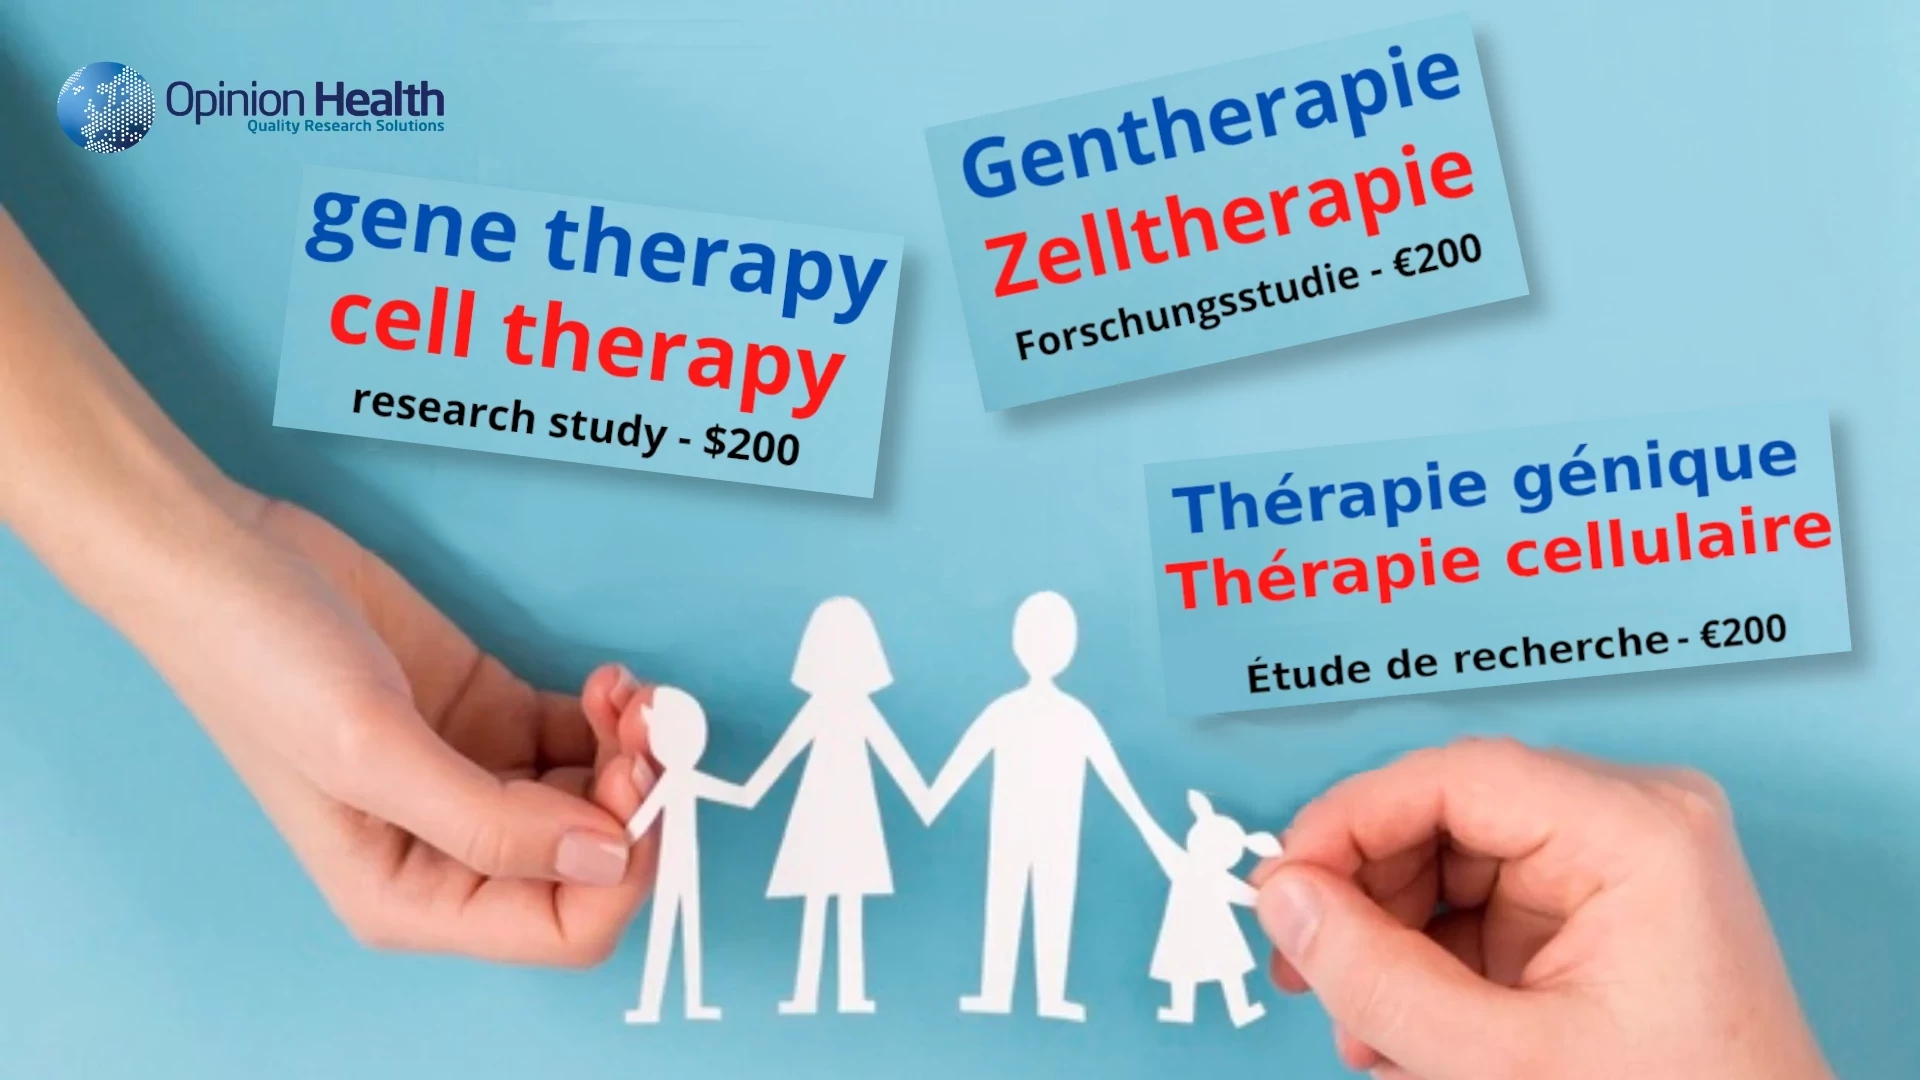 Research study on gene and cell therapy, for US, Deutschland, et la France